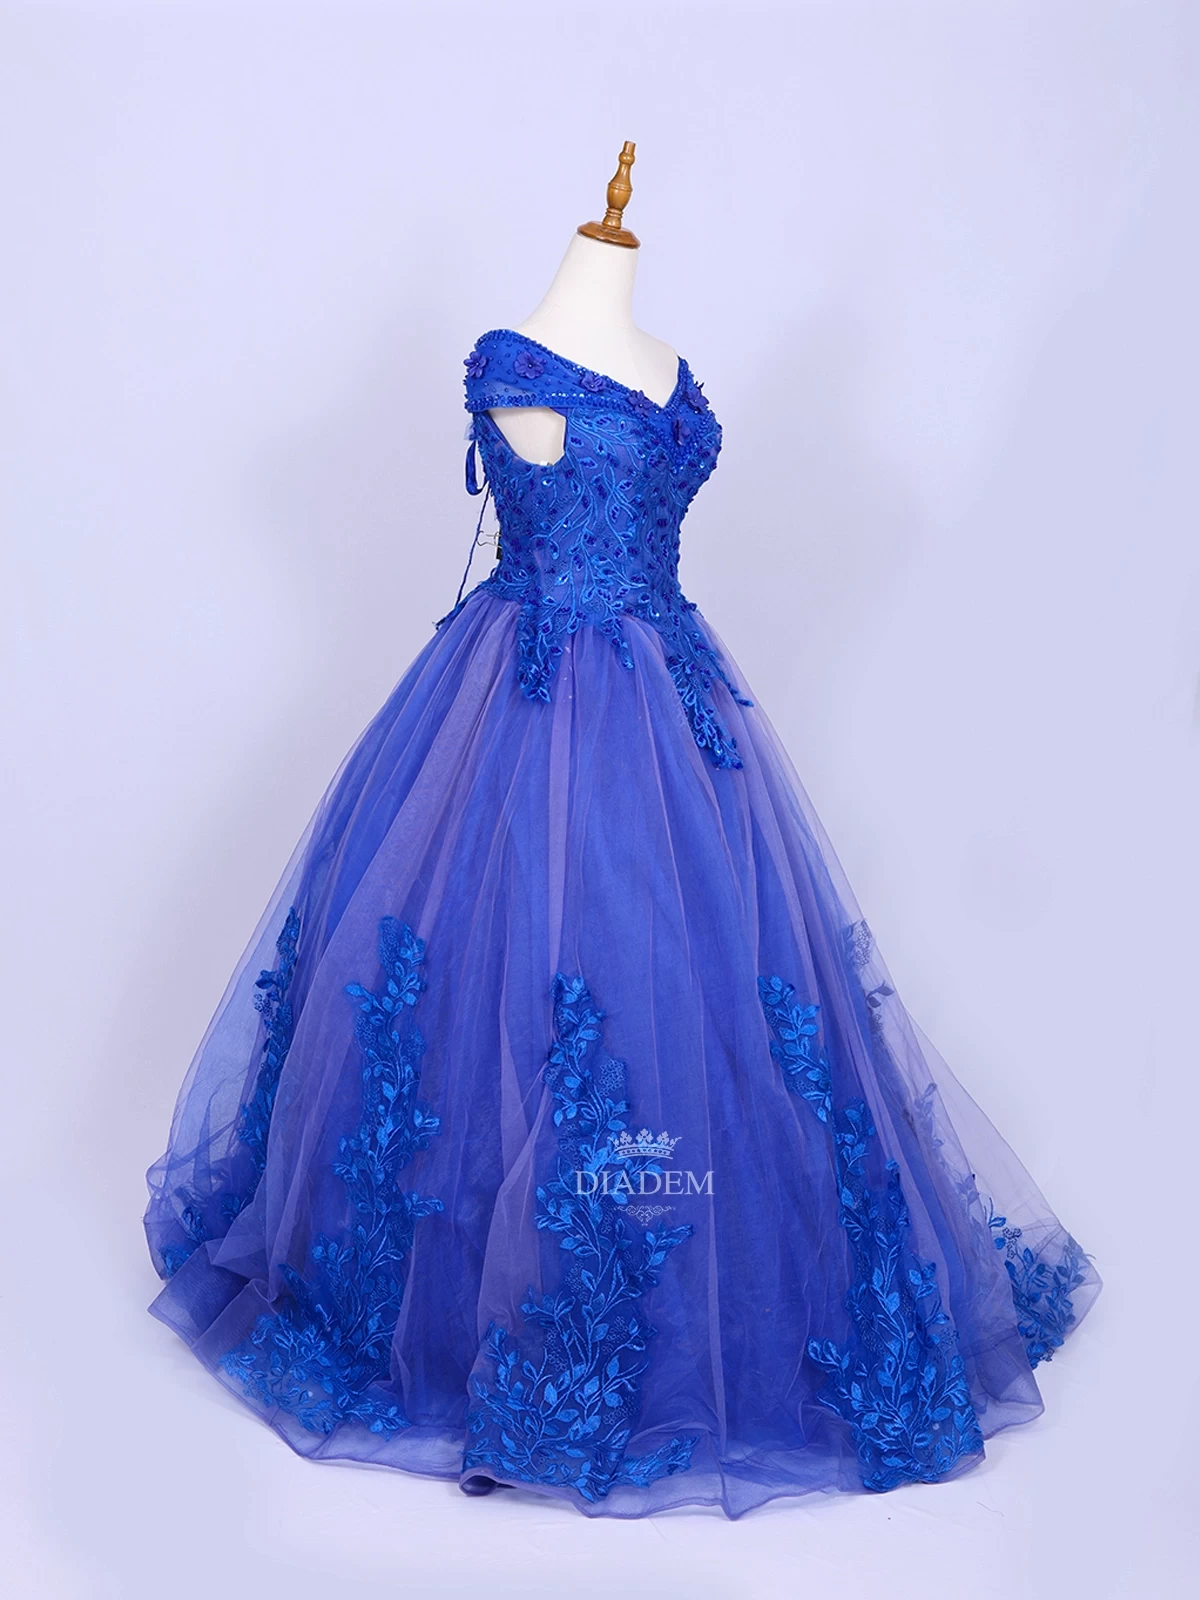 Royal Blue Net Off-shoulder Gown Adorned With Floral Laces And Sequins